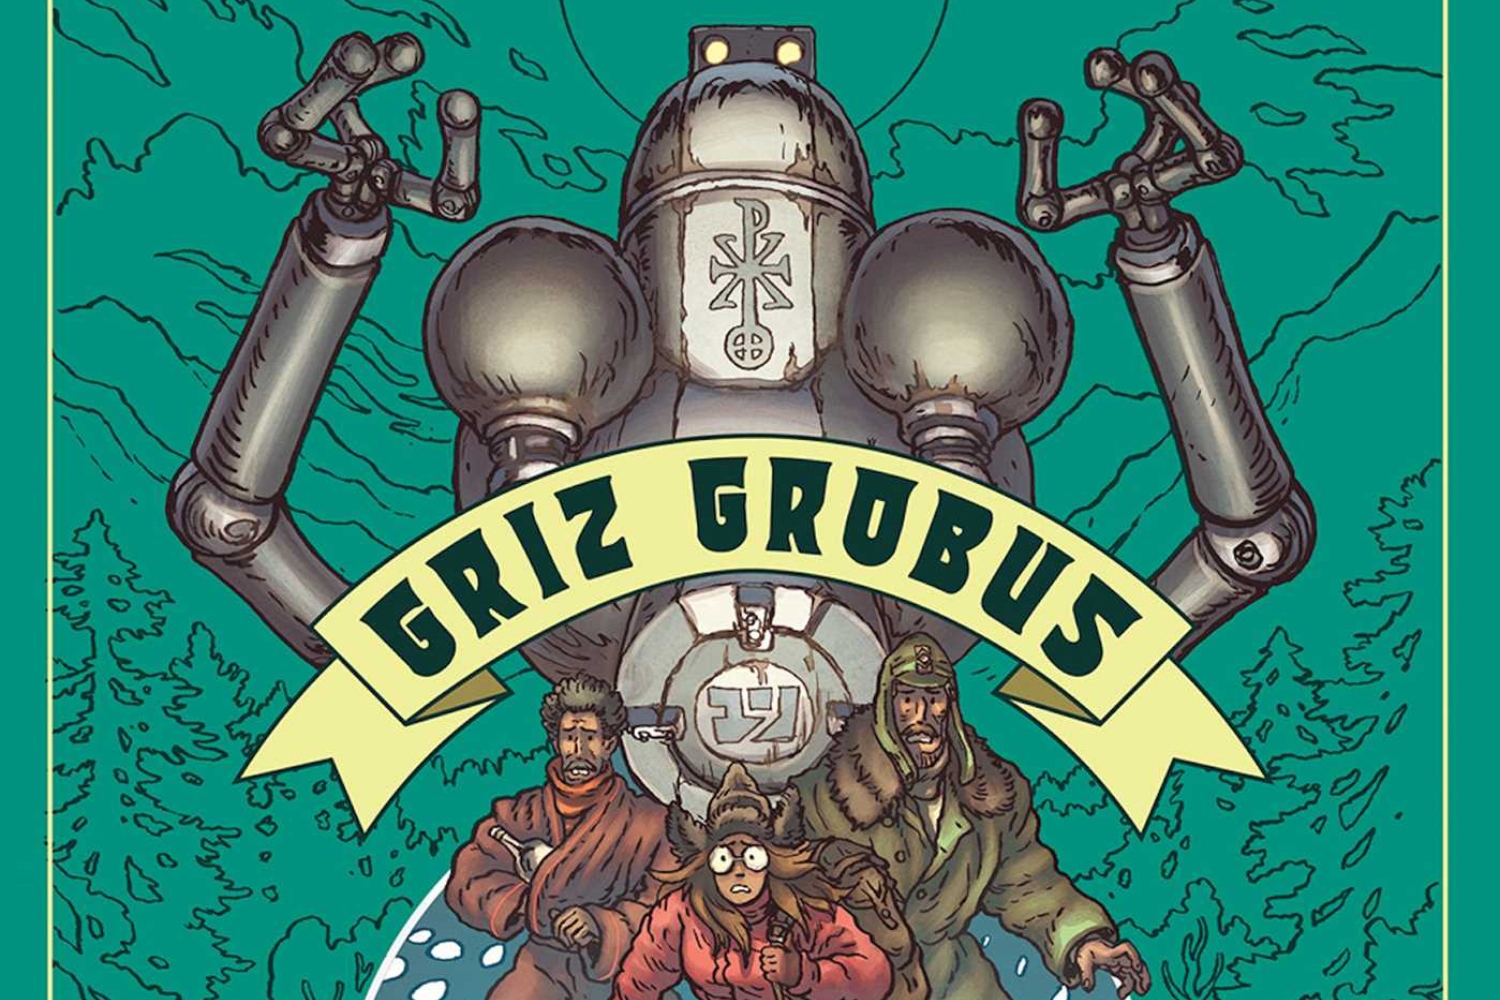 Simon Roy welcomes us to the universe of 'Griz Grobus'